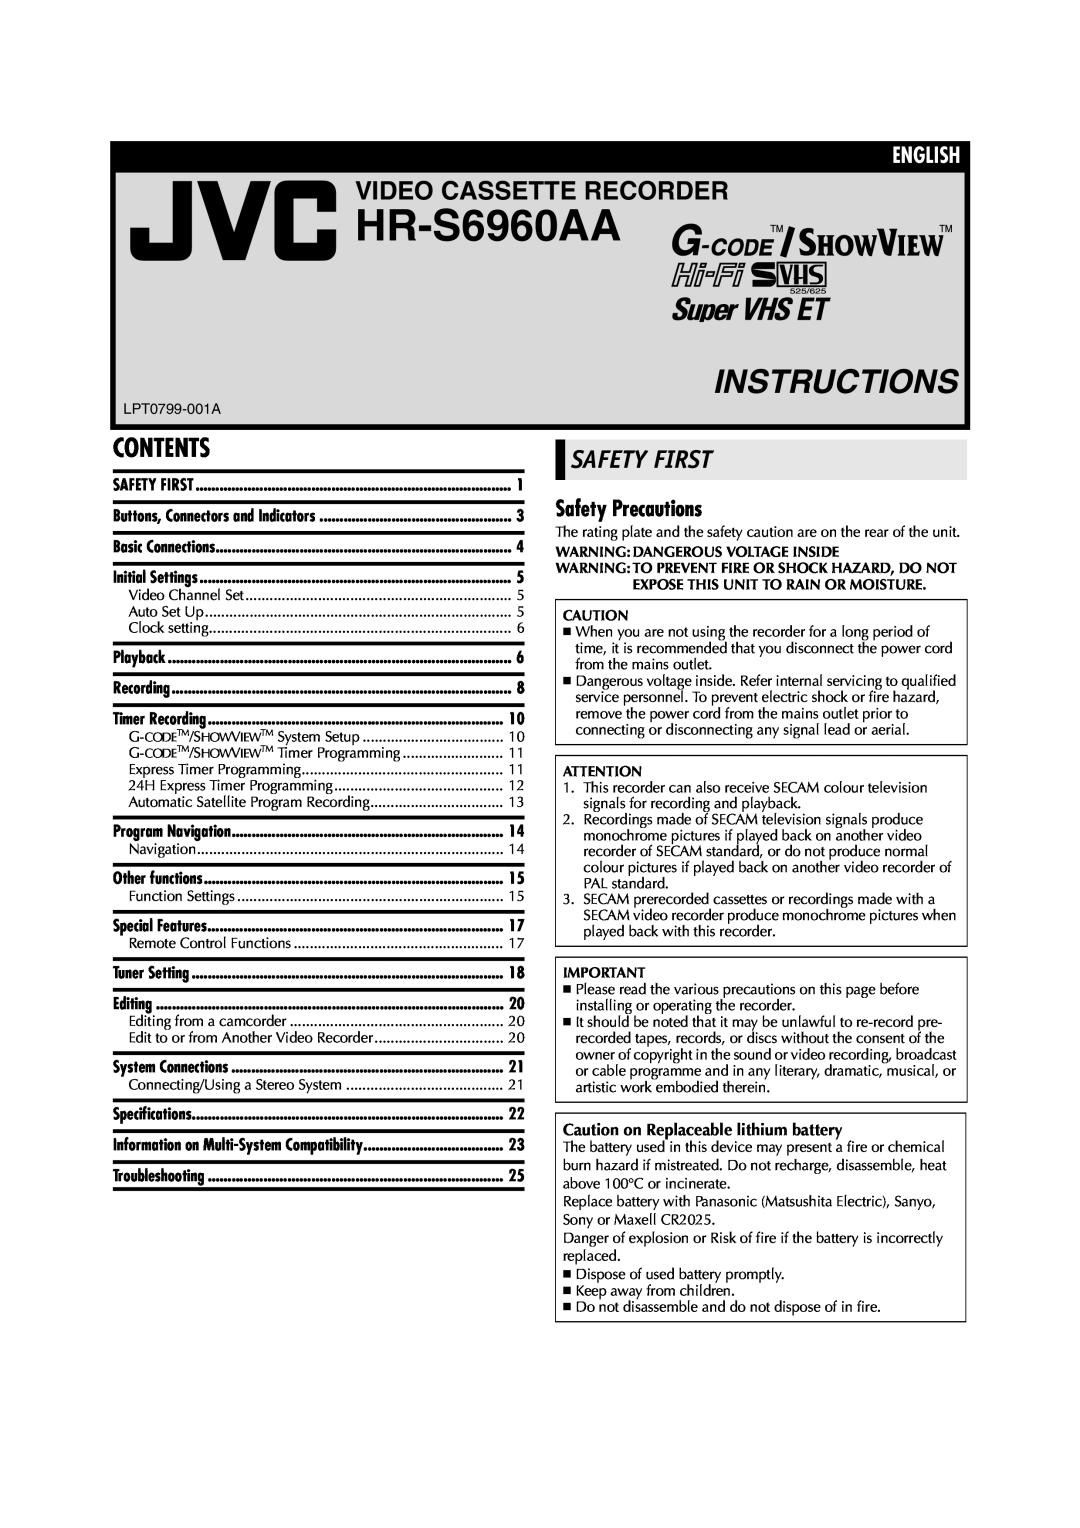 JVC LPT0799-001A specifications Contents, Safety First, Safety Precautions, Caution on Replaceable lithium battery 